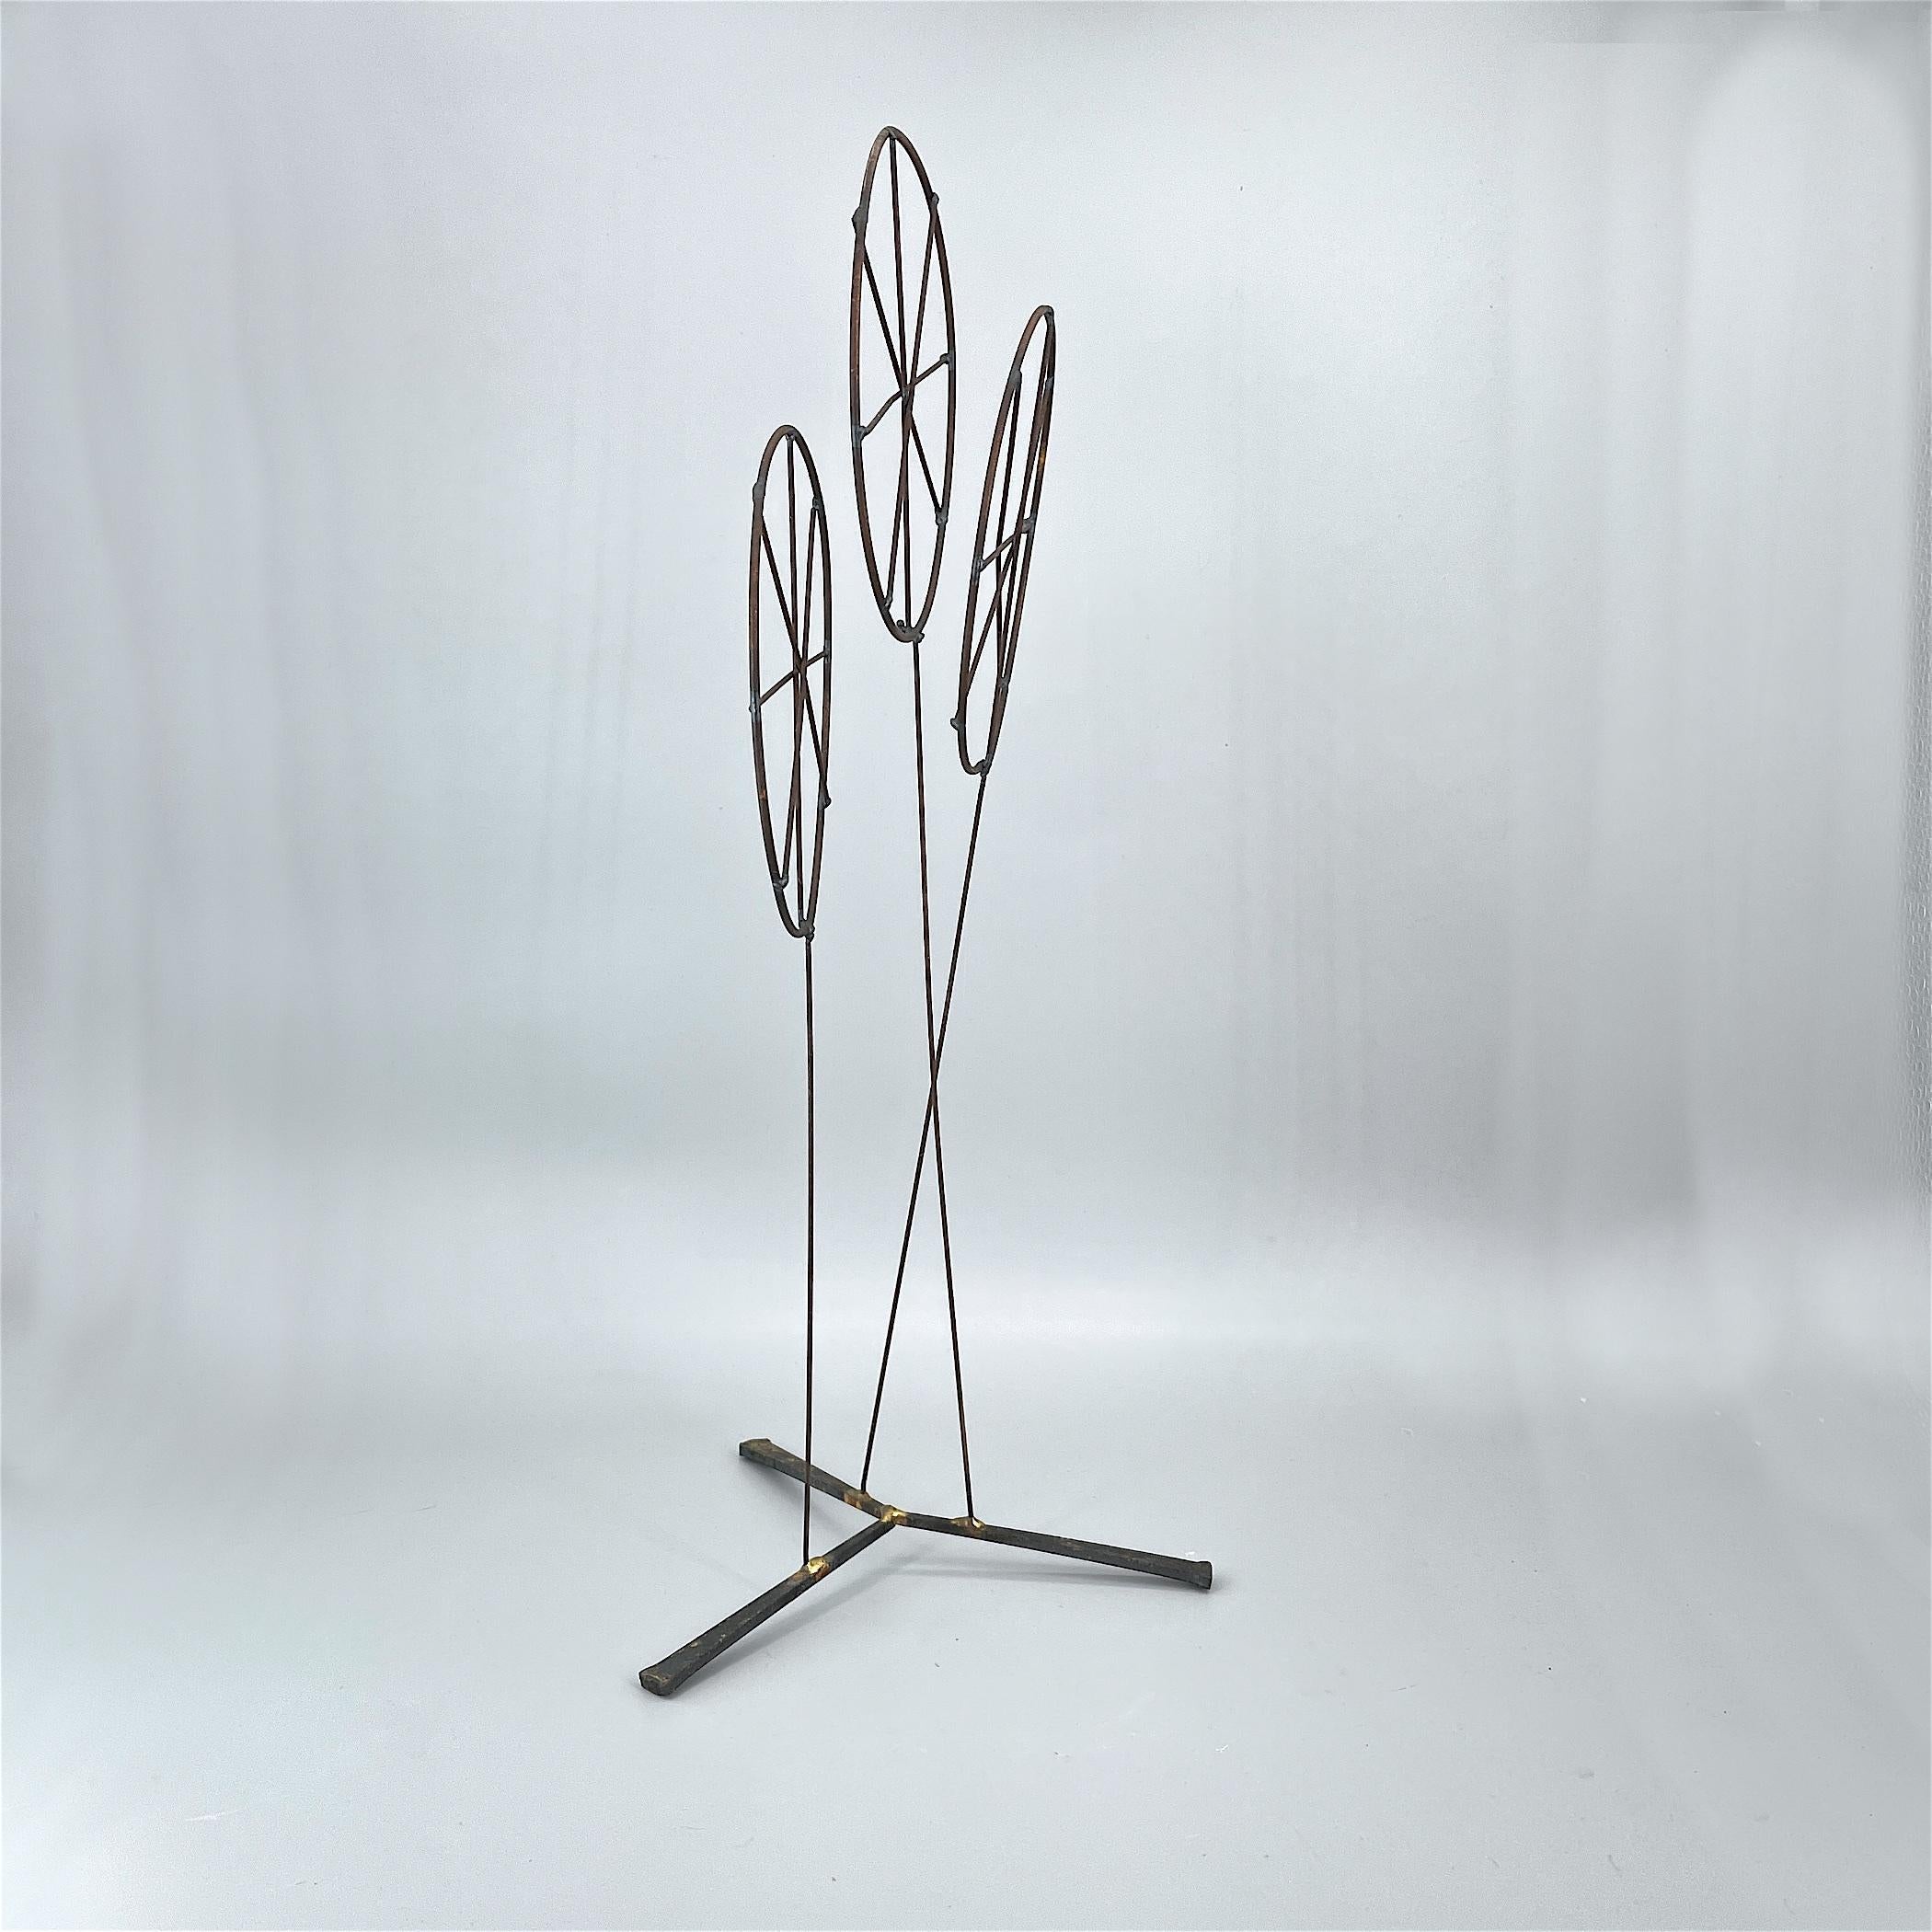 Wonderful and delicate Mid-Century era welded tabletop kinetic sculpture, no signature can be found, but it is very much like the works of Curtis Jere for Artisan House, with a little Harry Bertoia influences. Came from a wonderful 1960s Washington